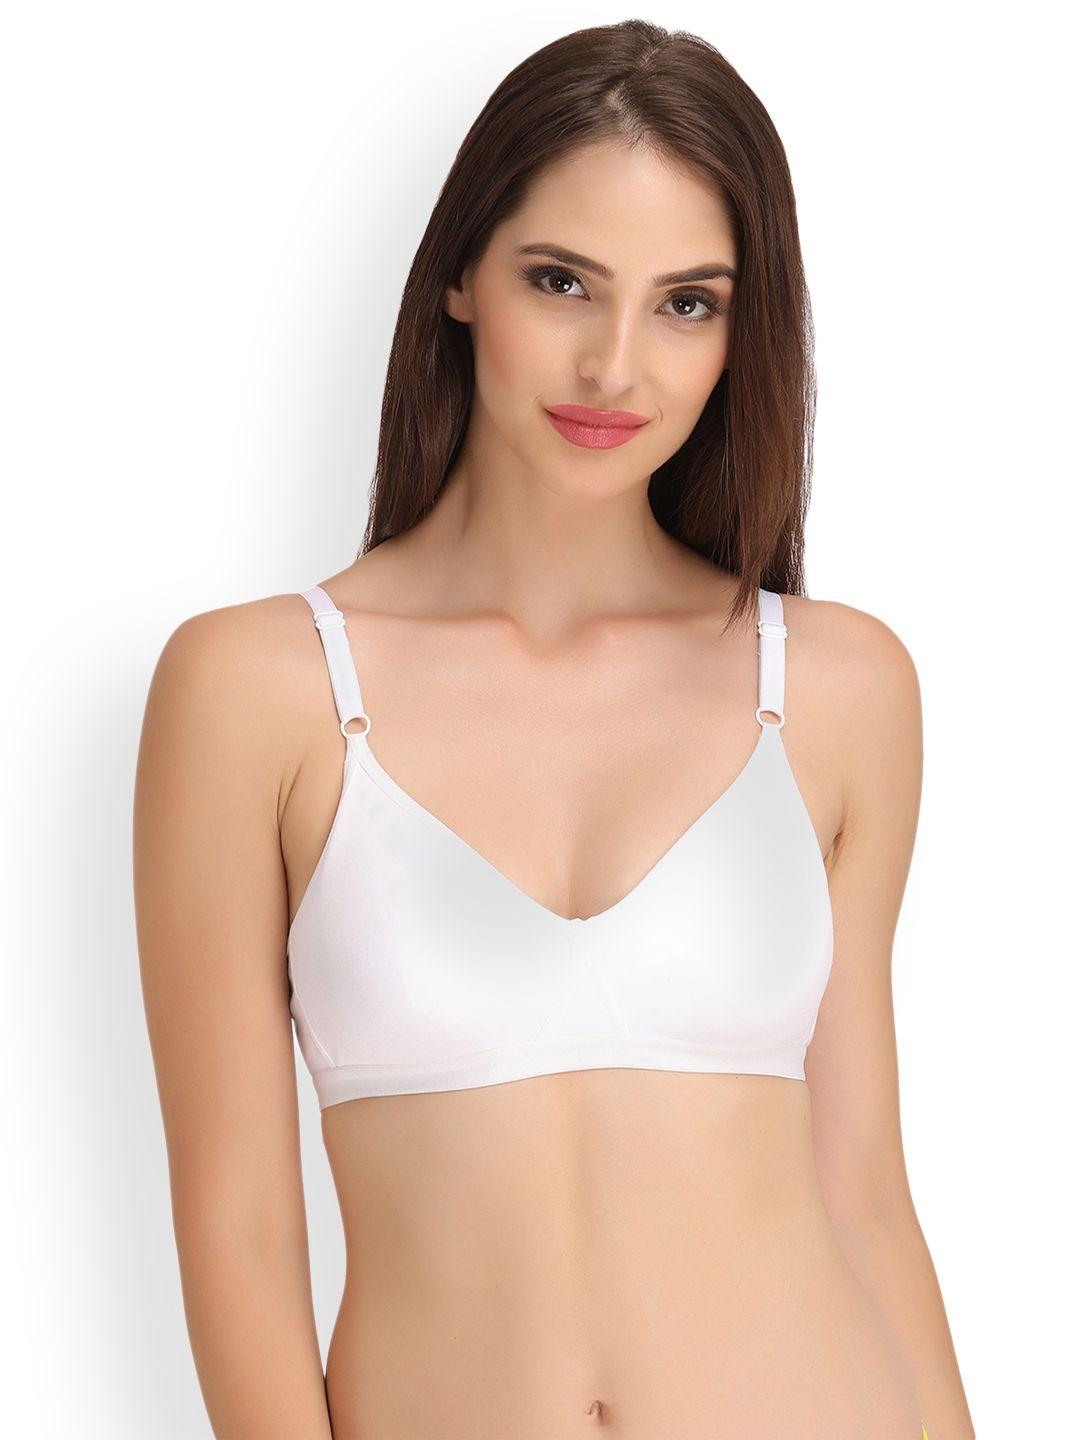 clovia t-shirt bra with moulded cross-over cups